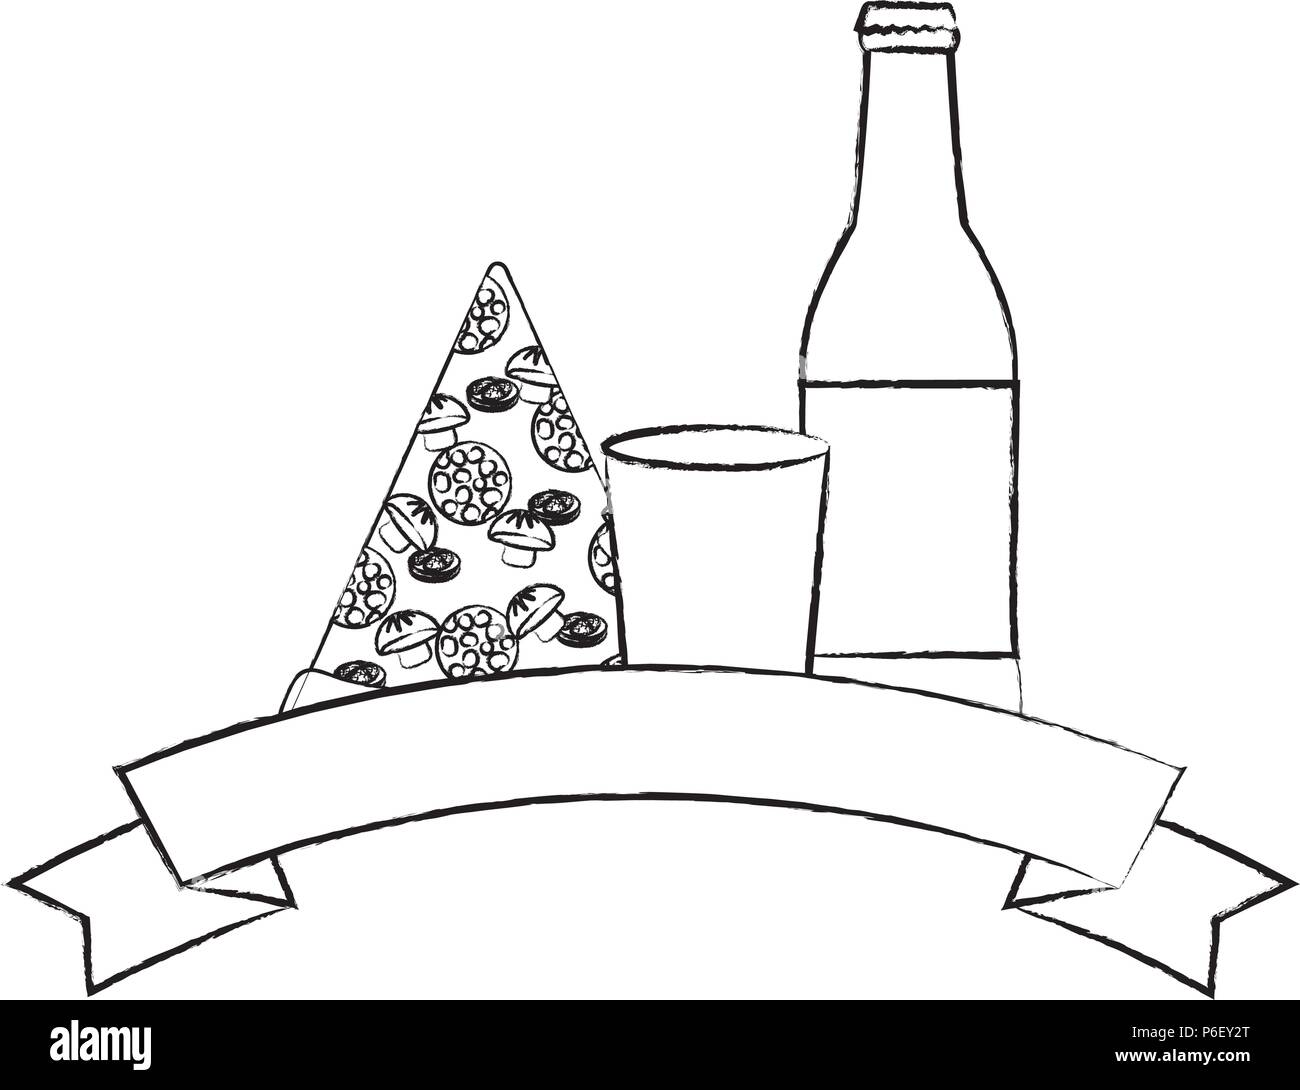 decorative ribbon with pizza and beer bottle over white background. vector illustration Stock Vector